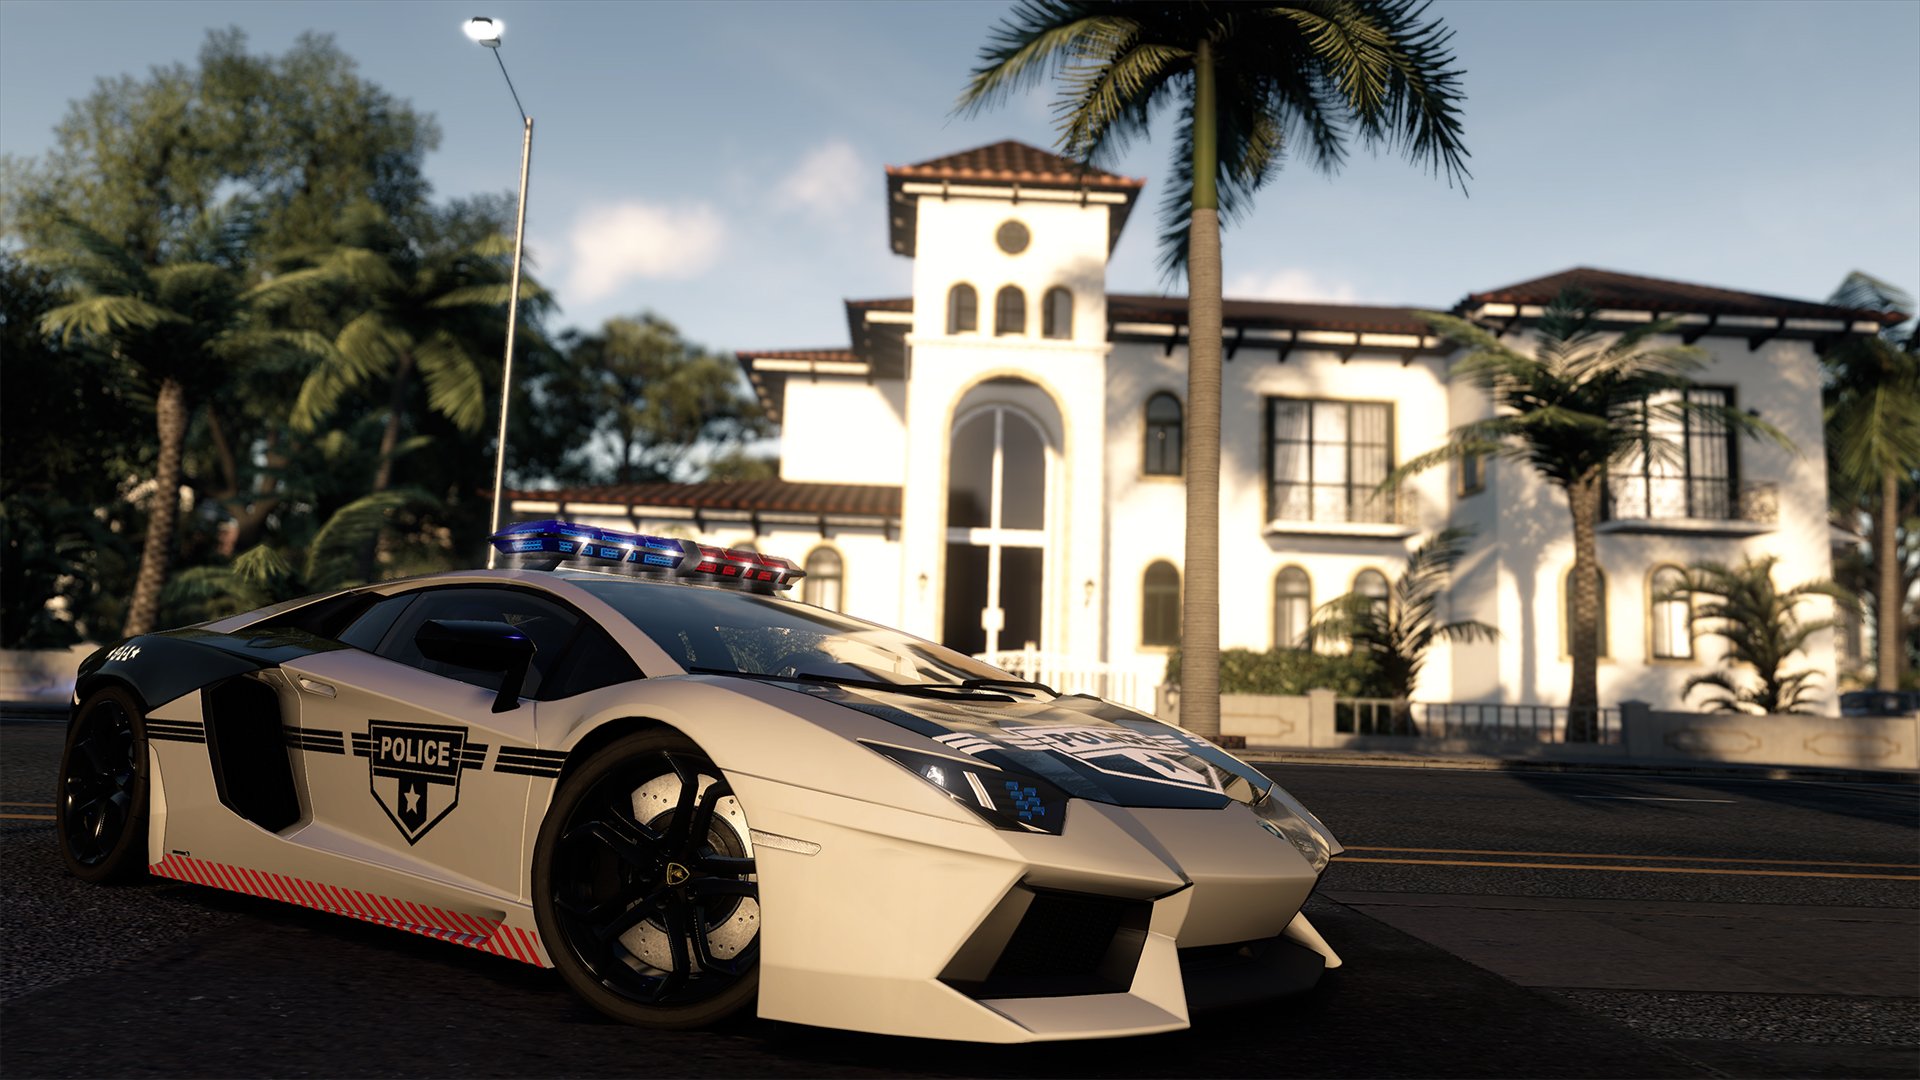 The Crew 2 The Lamborghini Aventador Is Ready For The Chase See You In The Crew Calling All Units T Co 6scruclt58 Twitter